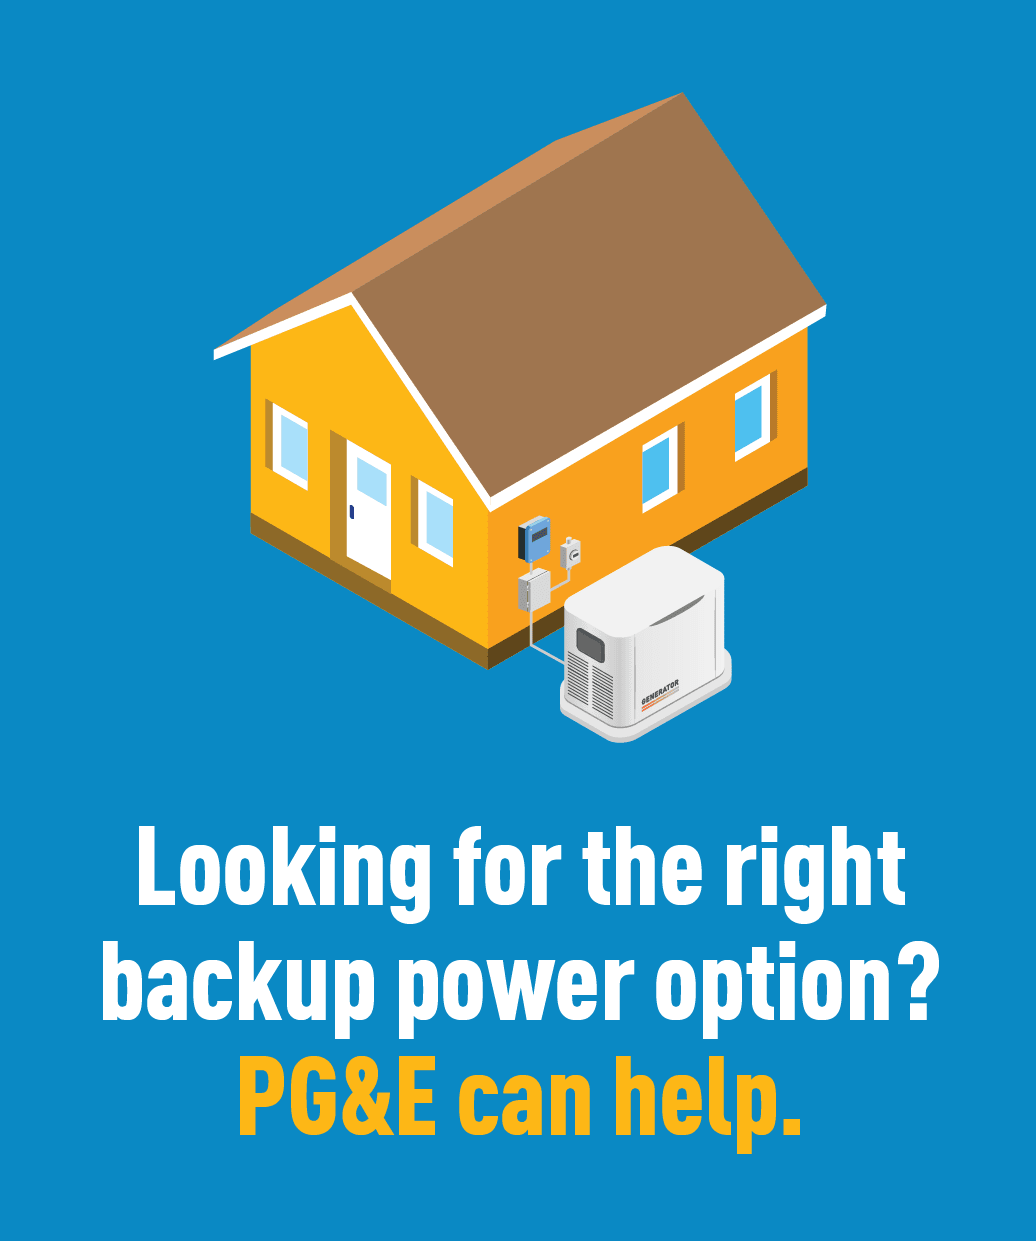 Looking for the right backup power option? PG&E can help.